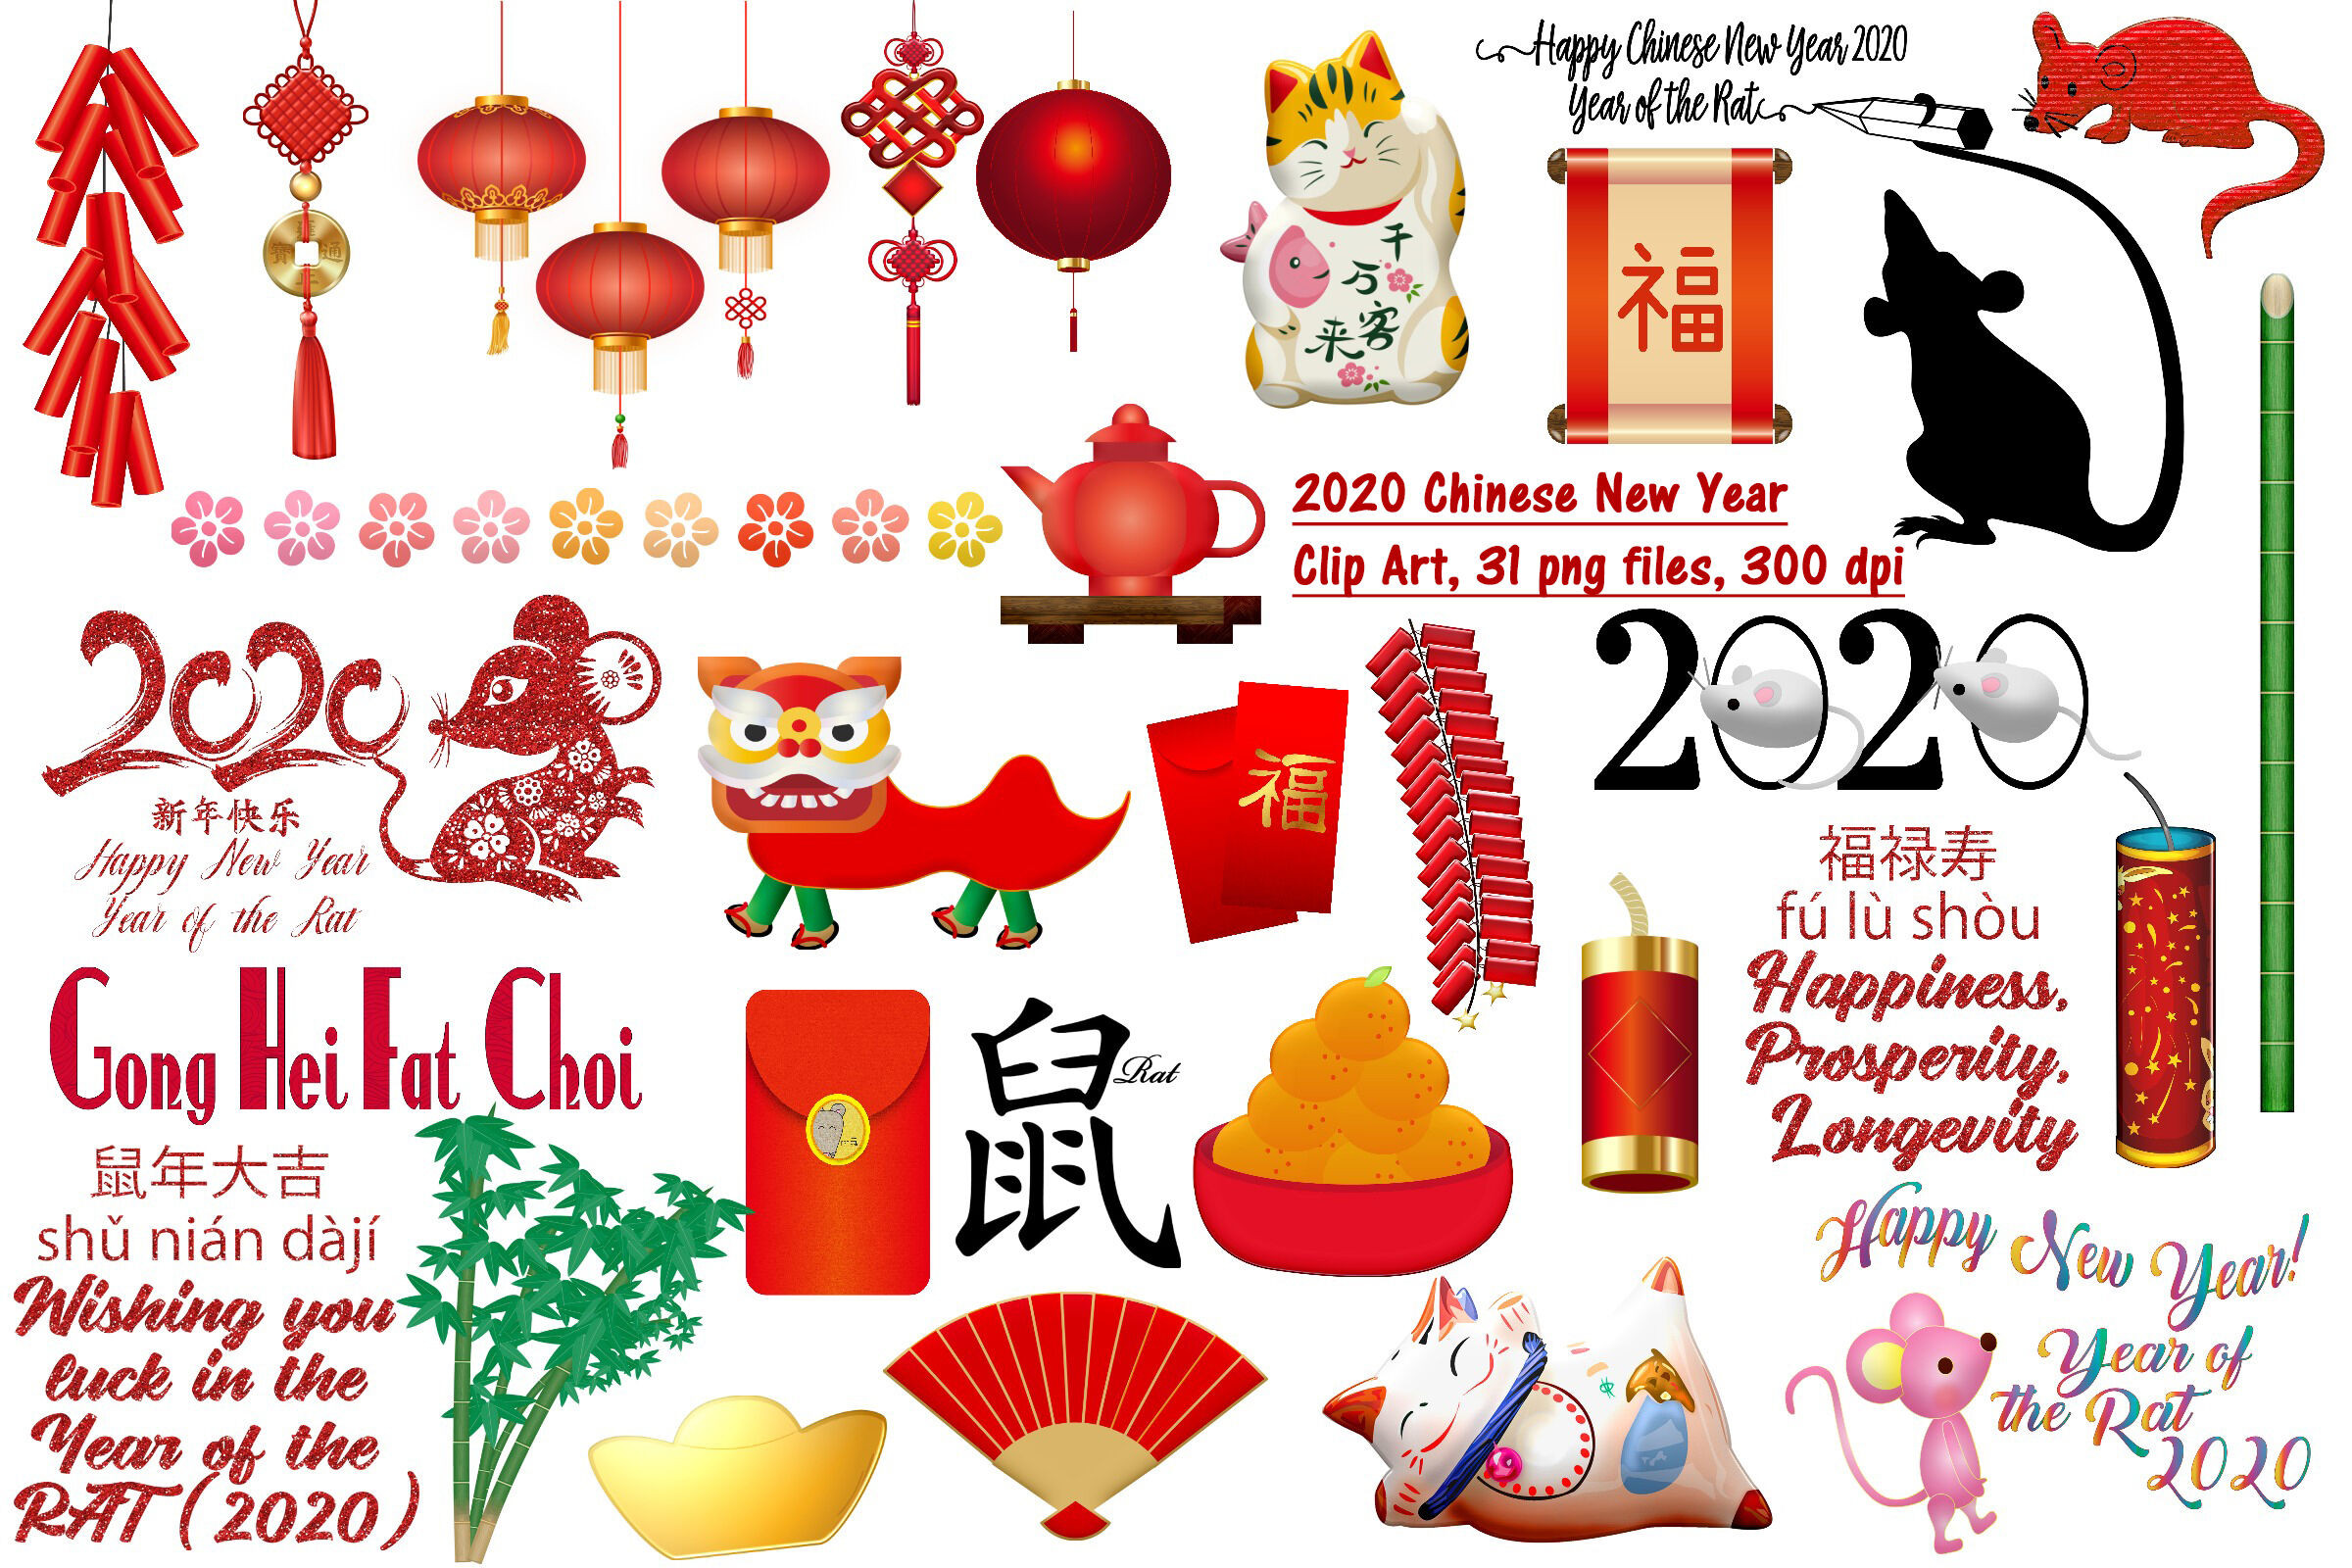 Chinese New Year 2020 Quotes
 Chinese New Year 2020 Clip Art By Me and Ameliè